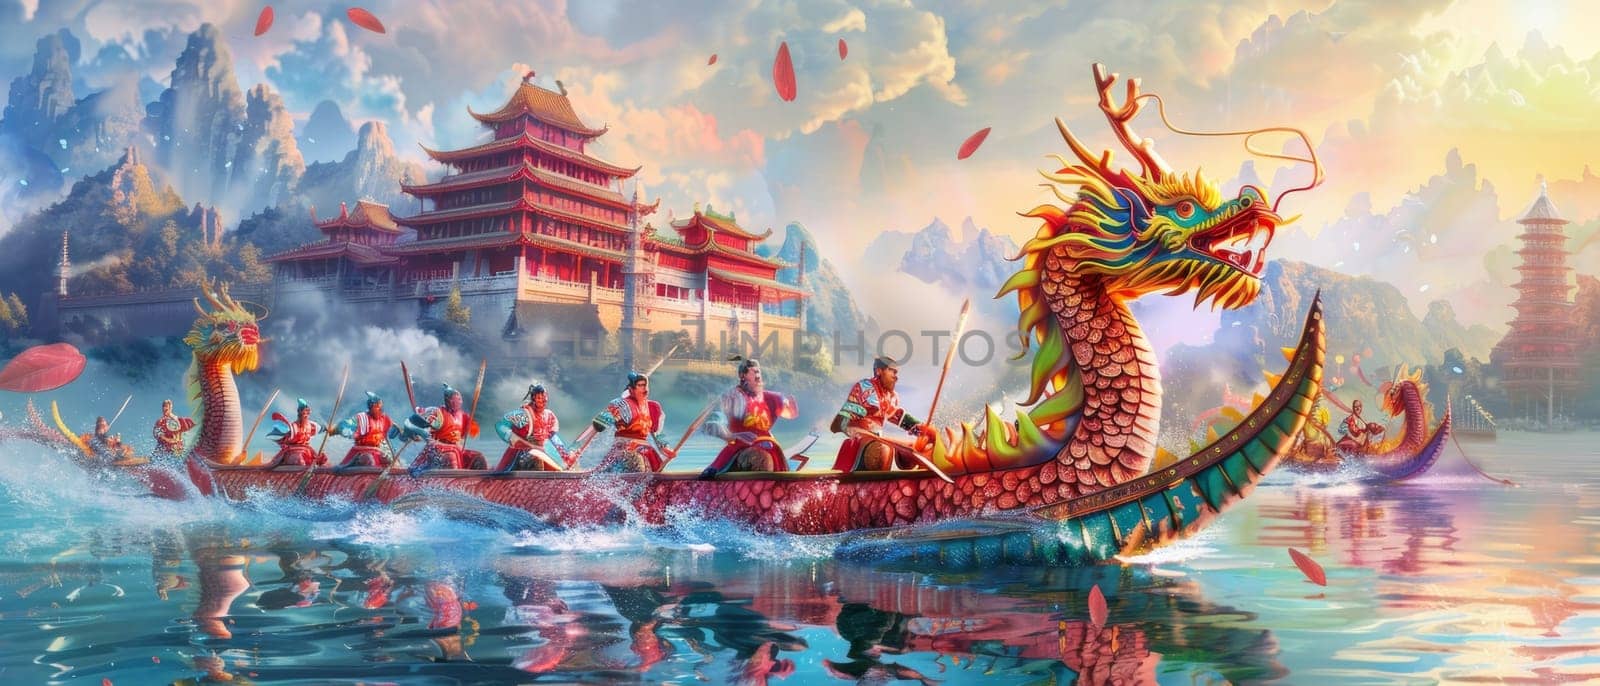 An epic scene with a dragon boat slicing through the water, rowers in sync, with a mythical dragon head leading against a traditional temple backdrop